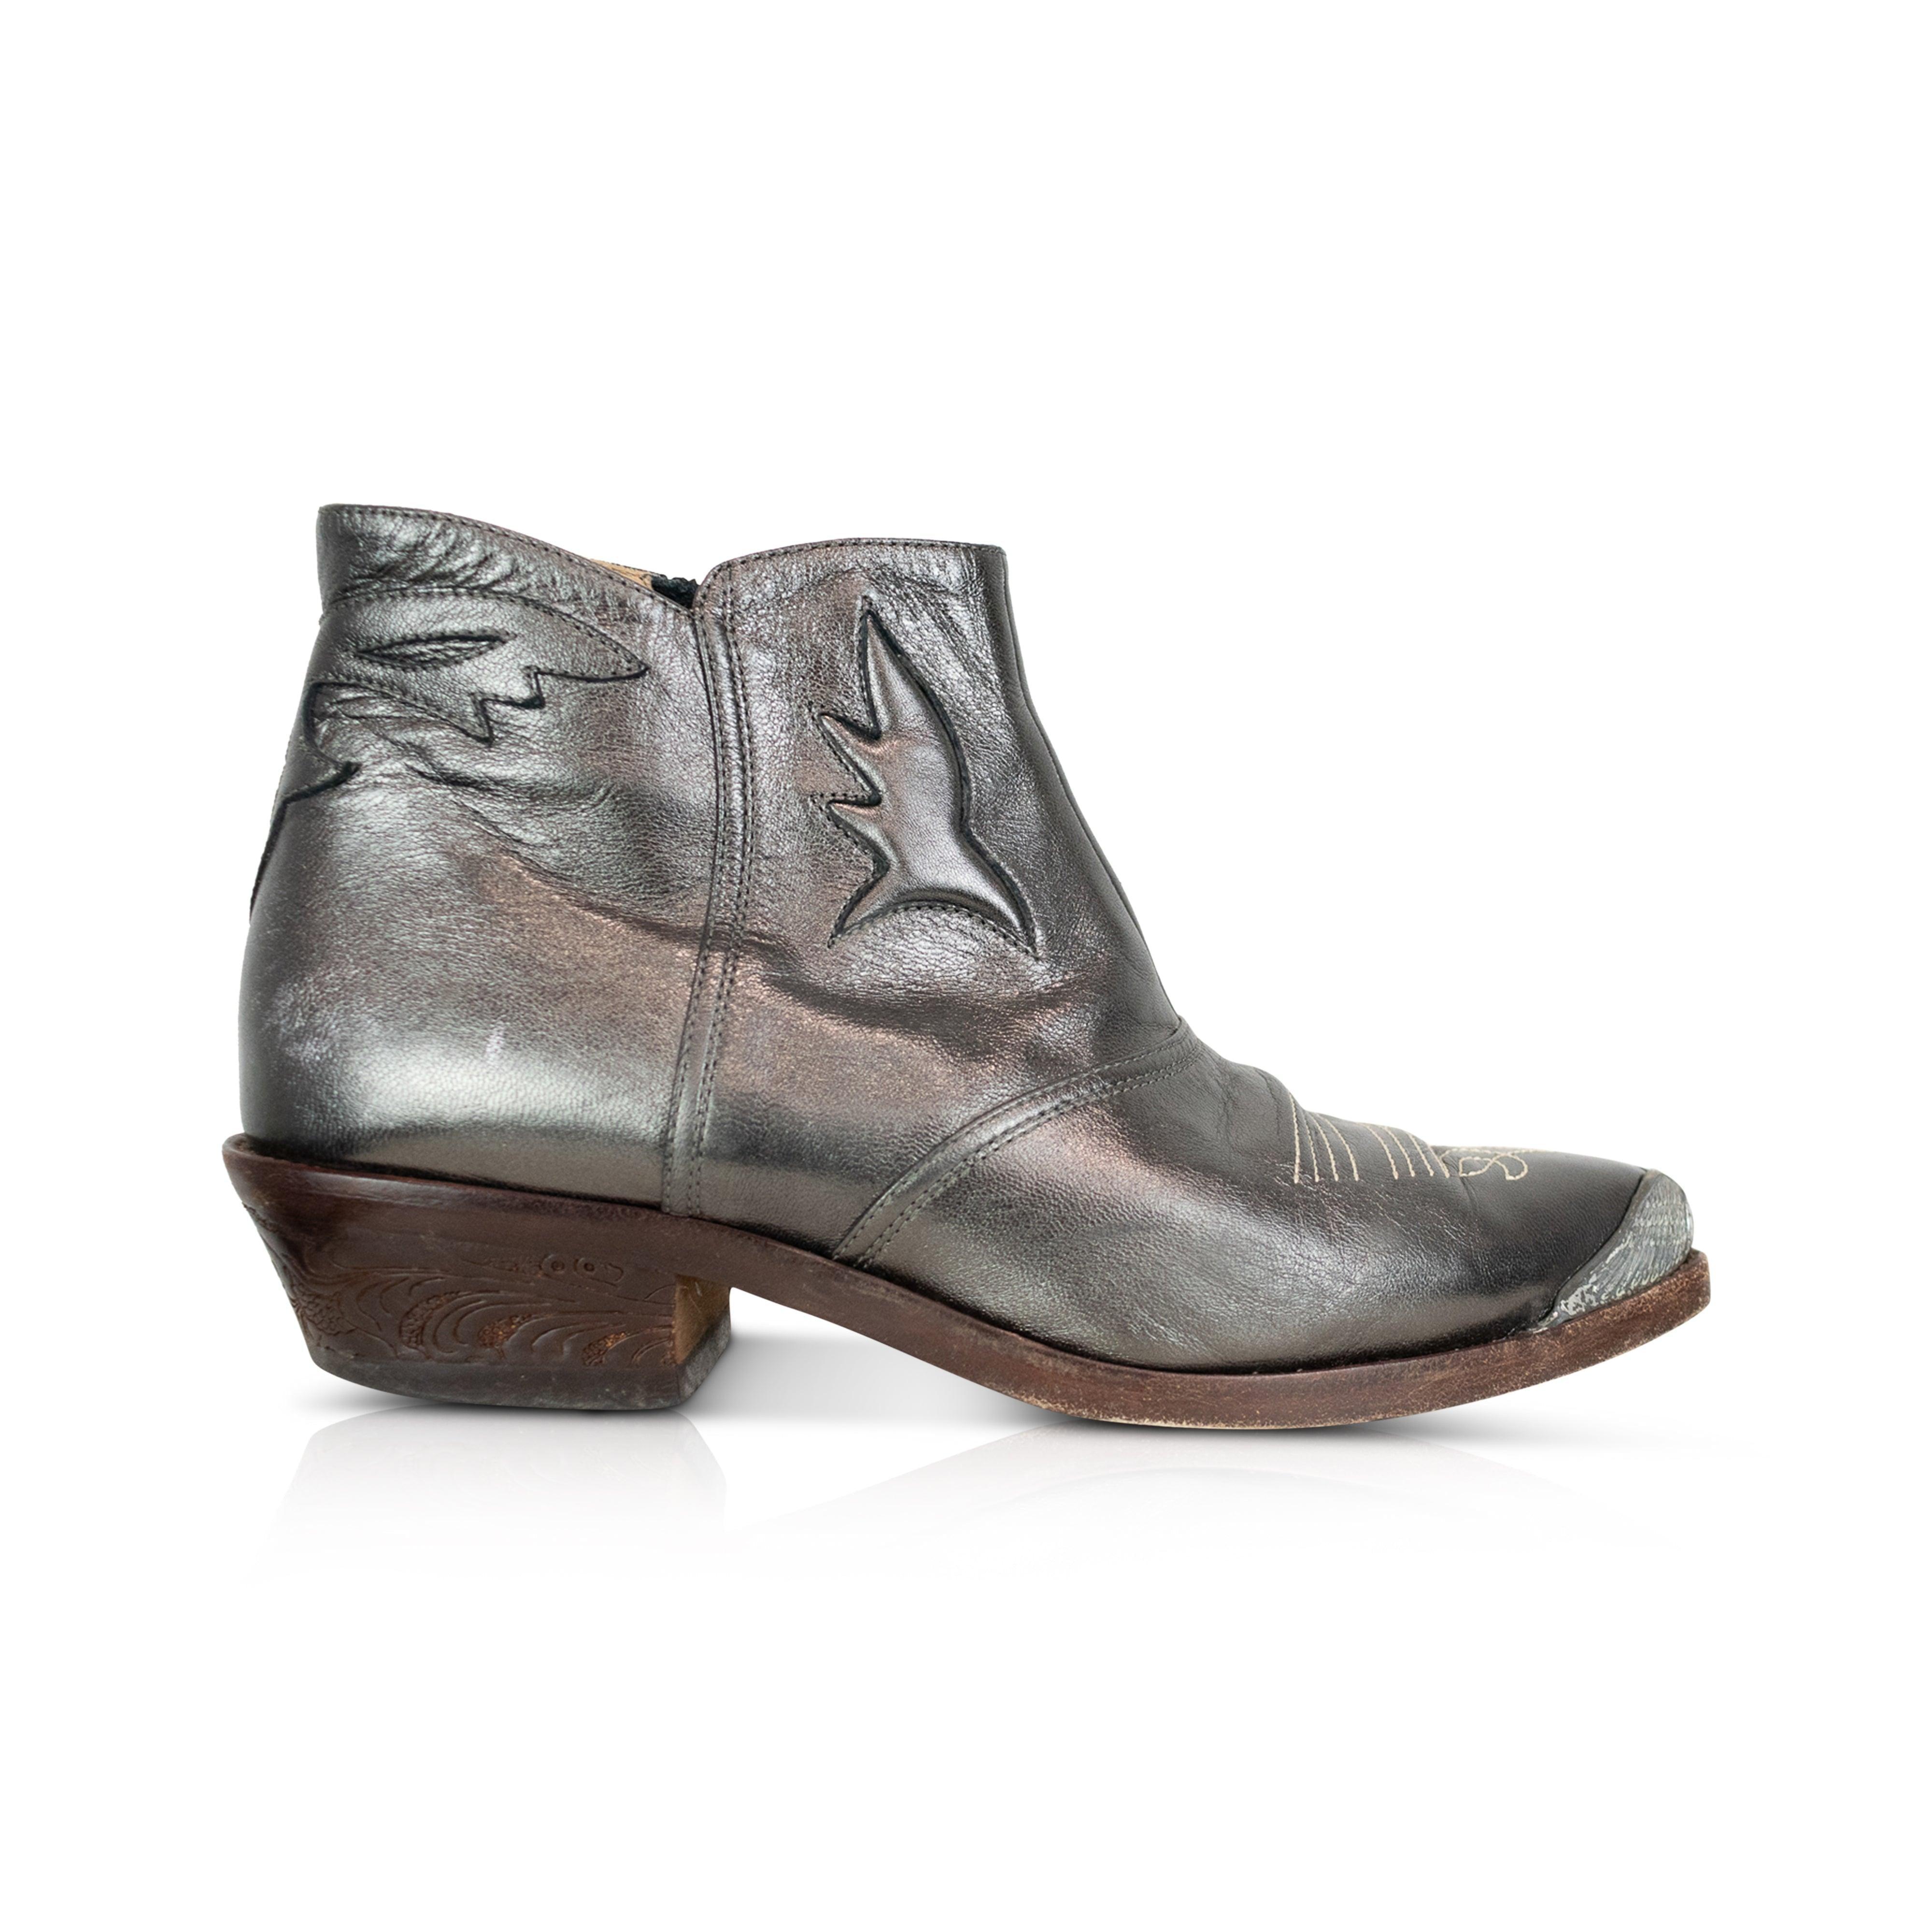 Golden Goose 'Thelma' Boots - Women's 39 - Fashionably Yours